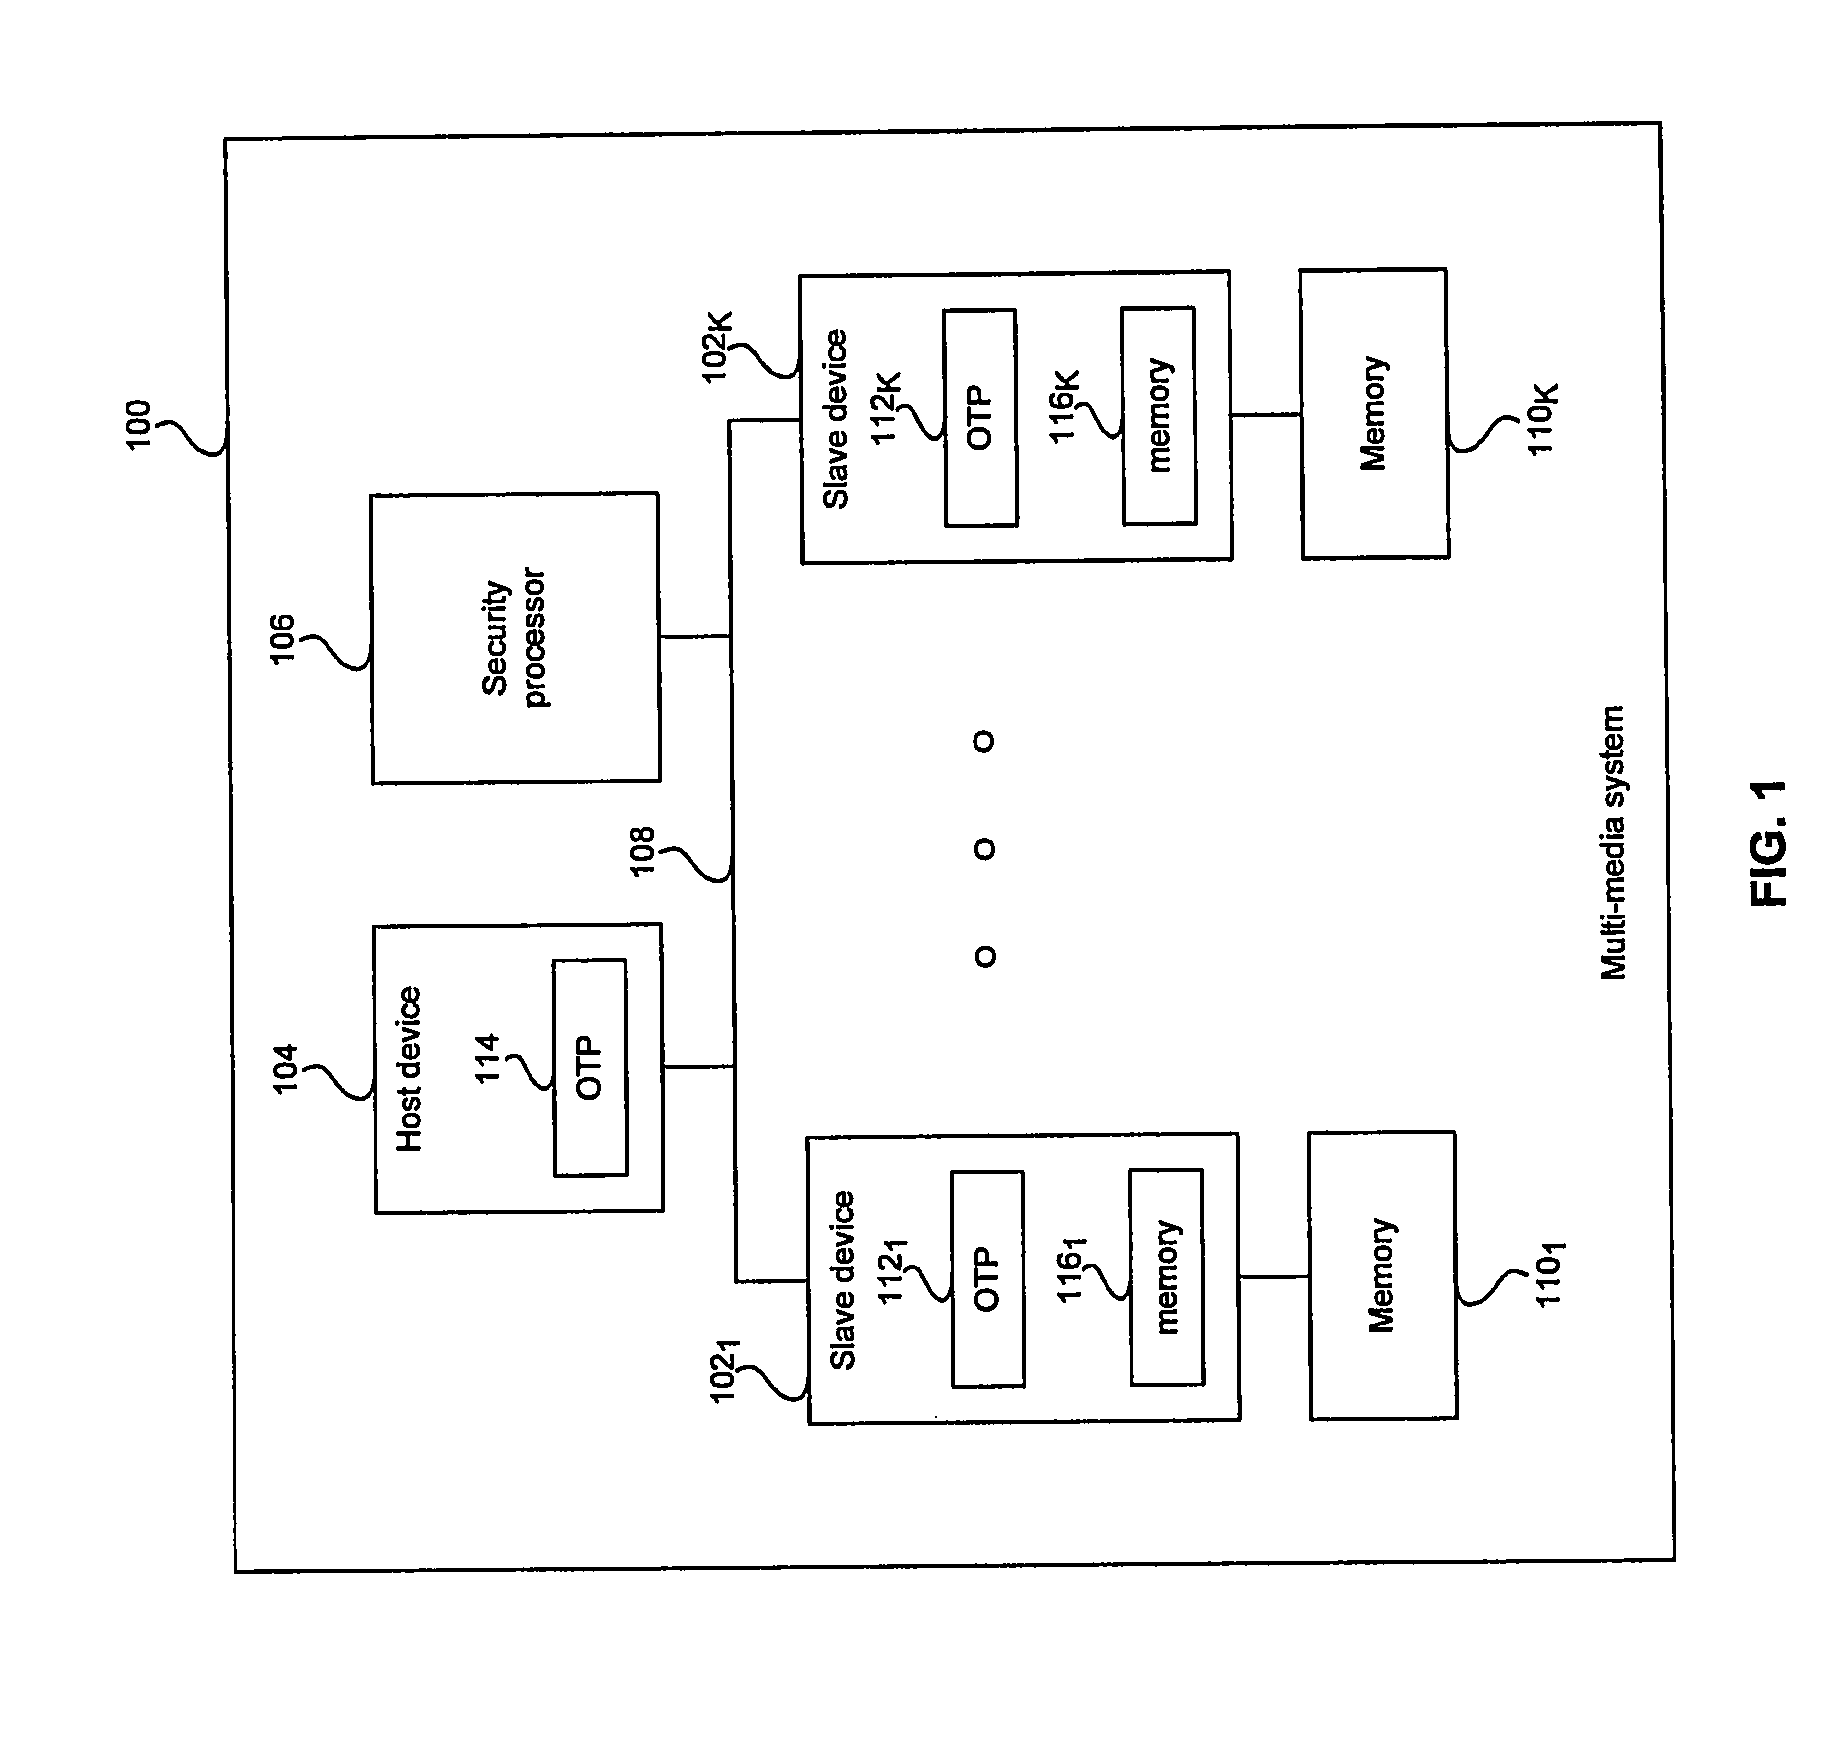 Method and system for memory attack protection to achieve a secure interface